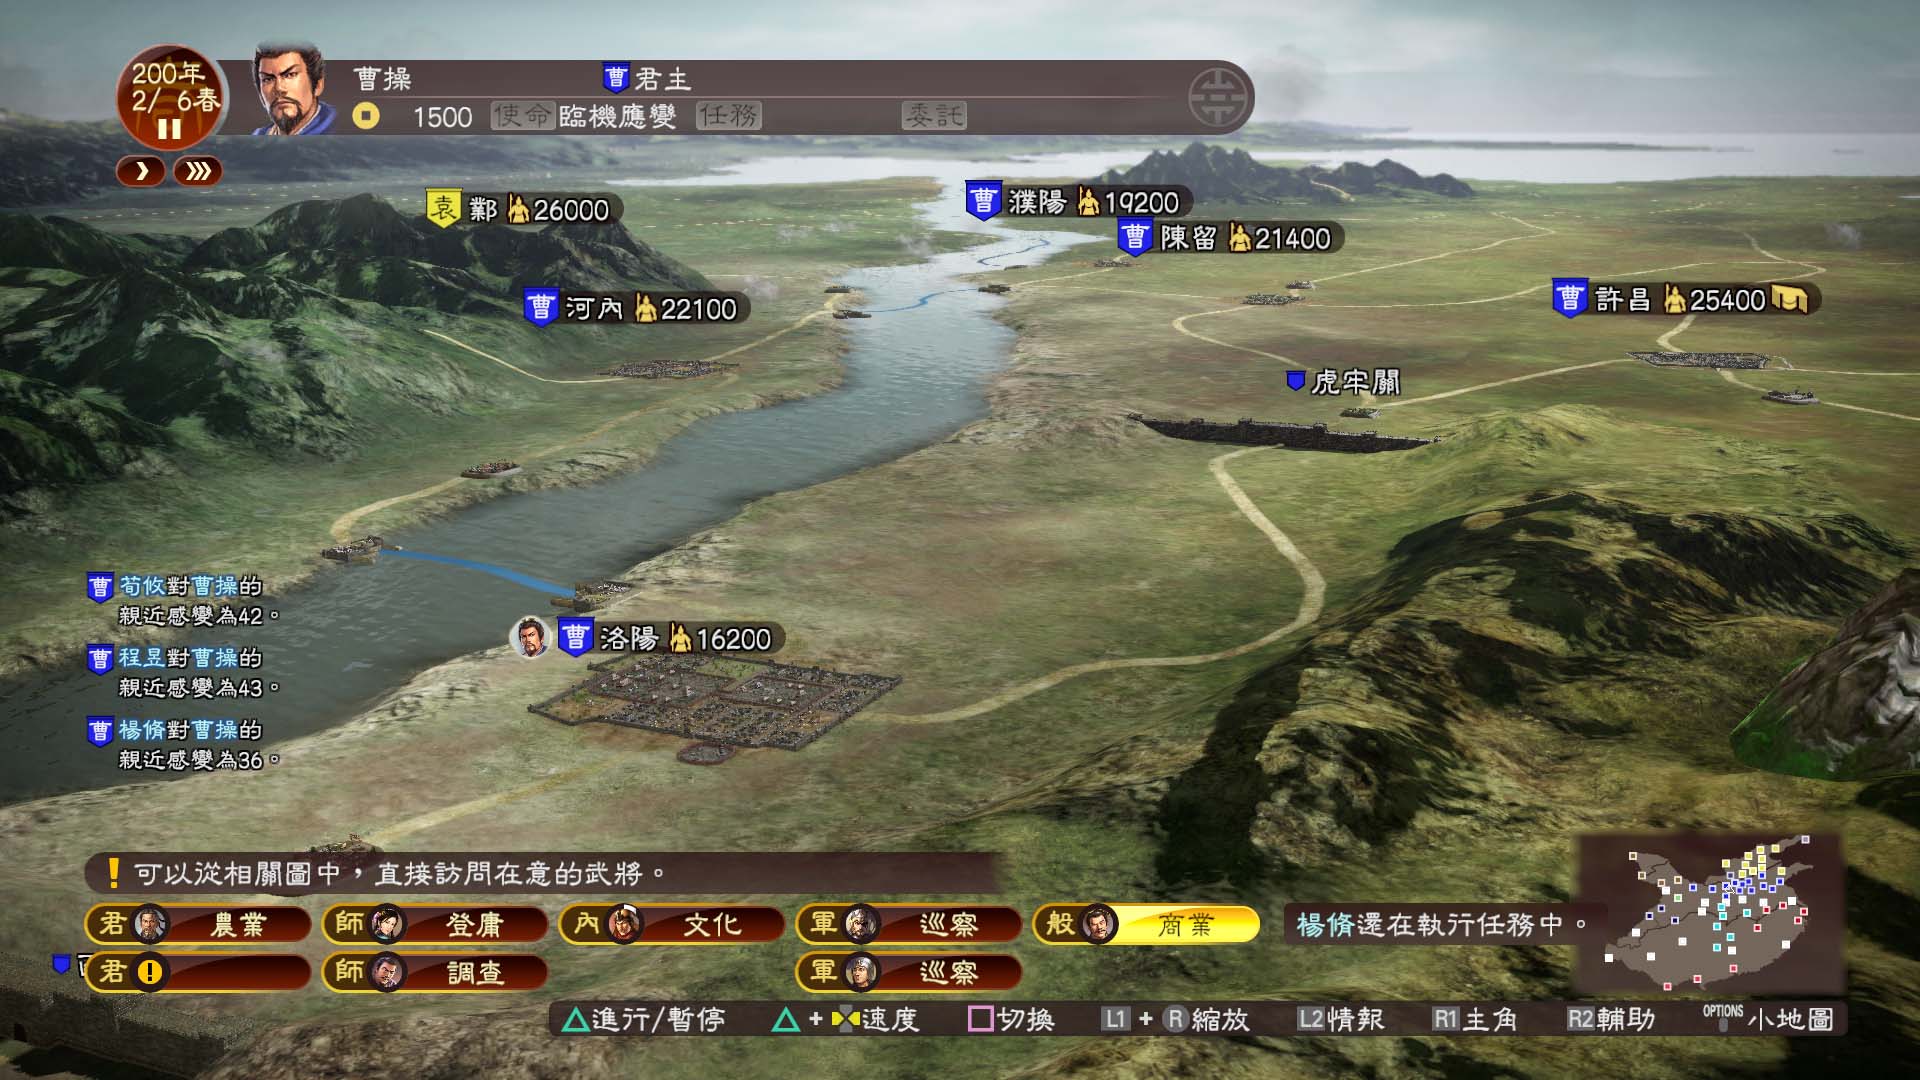 Romance Of The Three Kingdoms 13 Pc Download Education And Science News